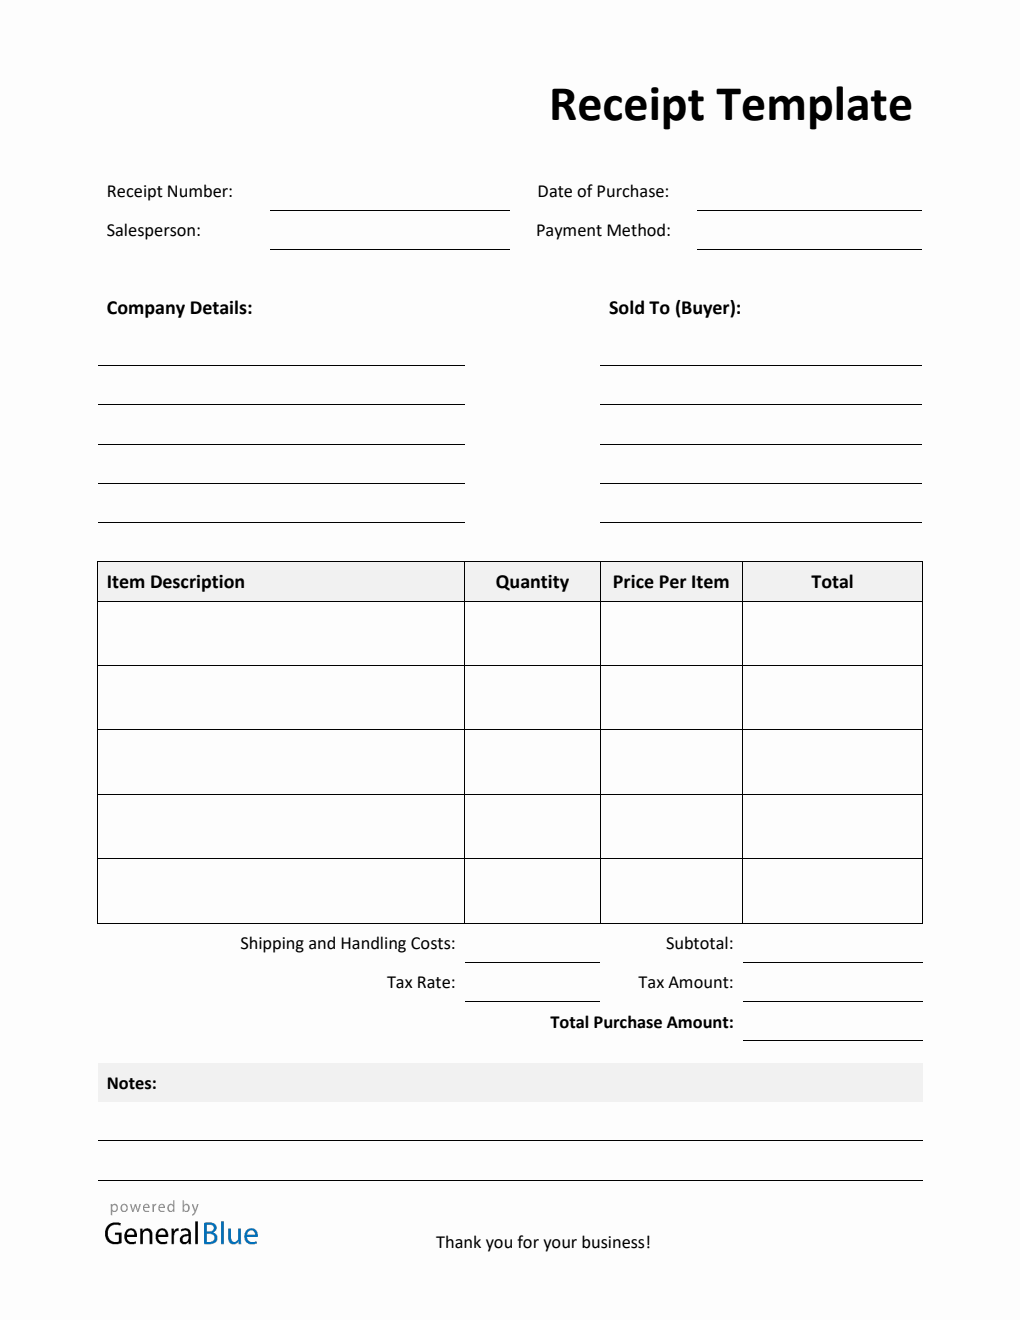 Basic Receipt Template with Notes in PDF